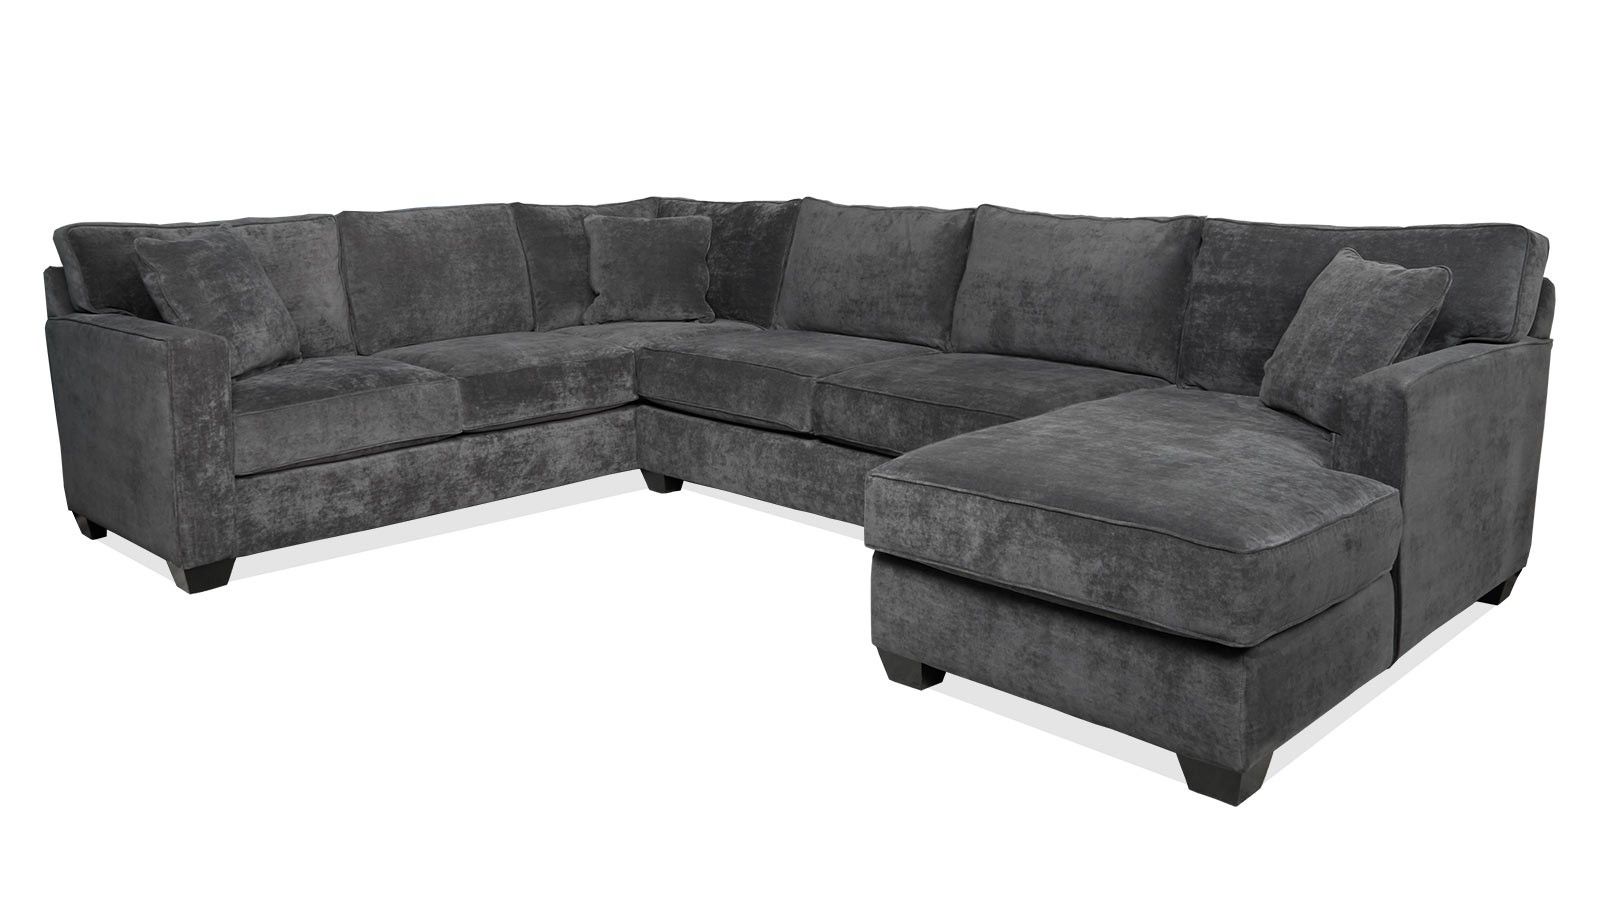 Featured Photo of 10 Inspirations Gallery Furniture Sectional Sofas